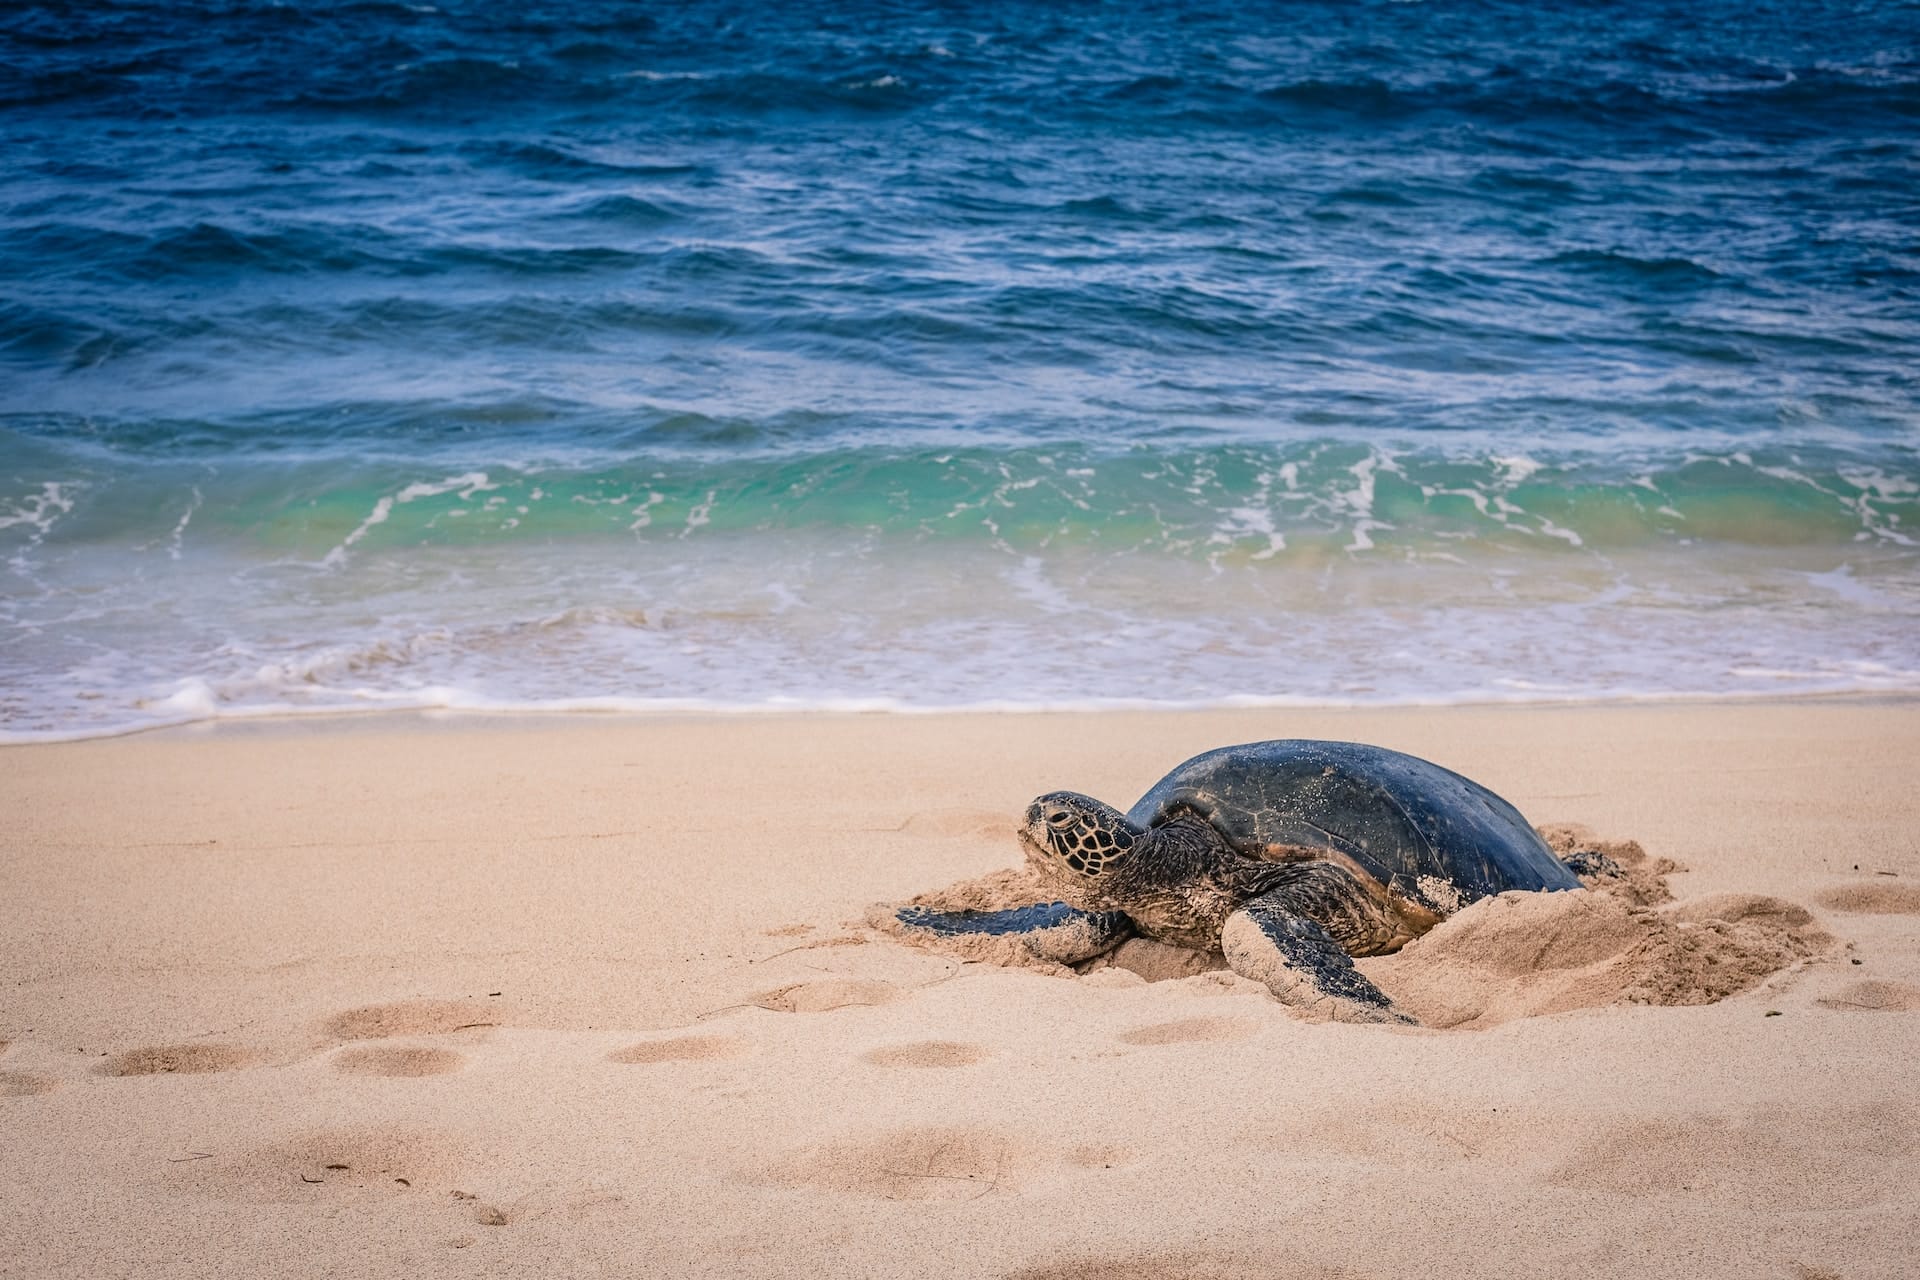 Where to spot sea turtles in Oahu